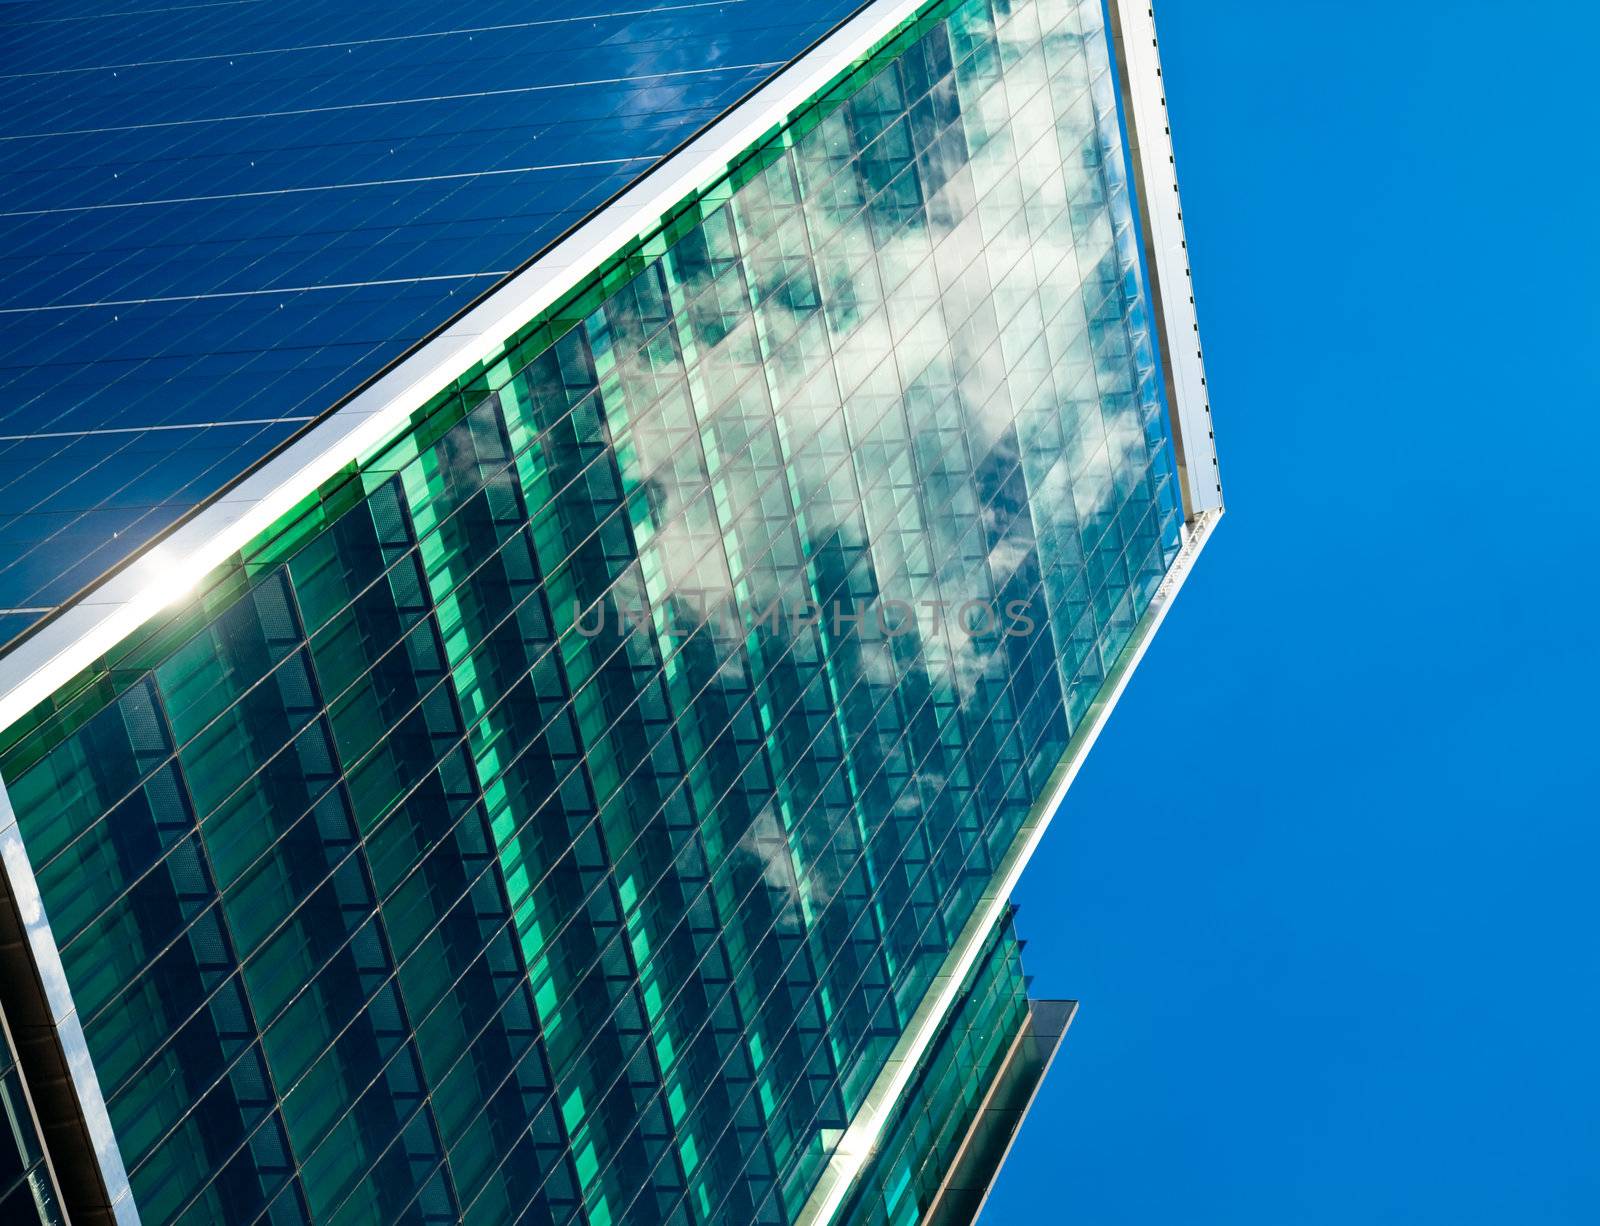 Sky and clouds reflected in a modern office building glass facade